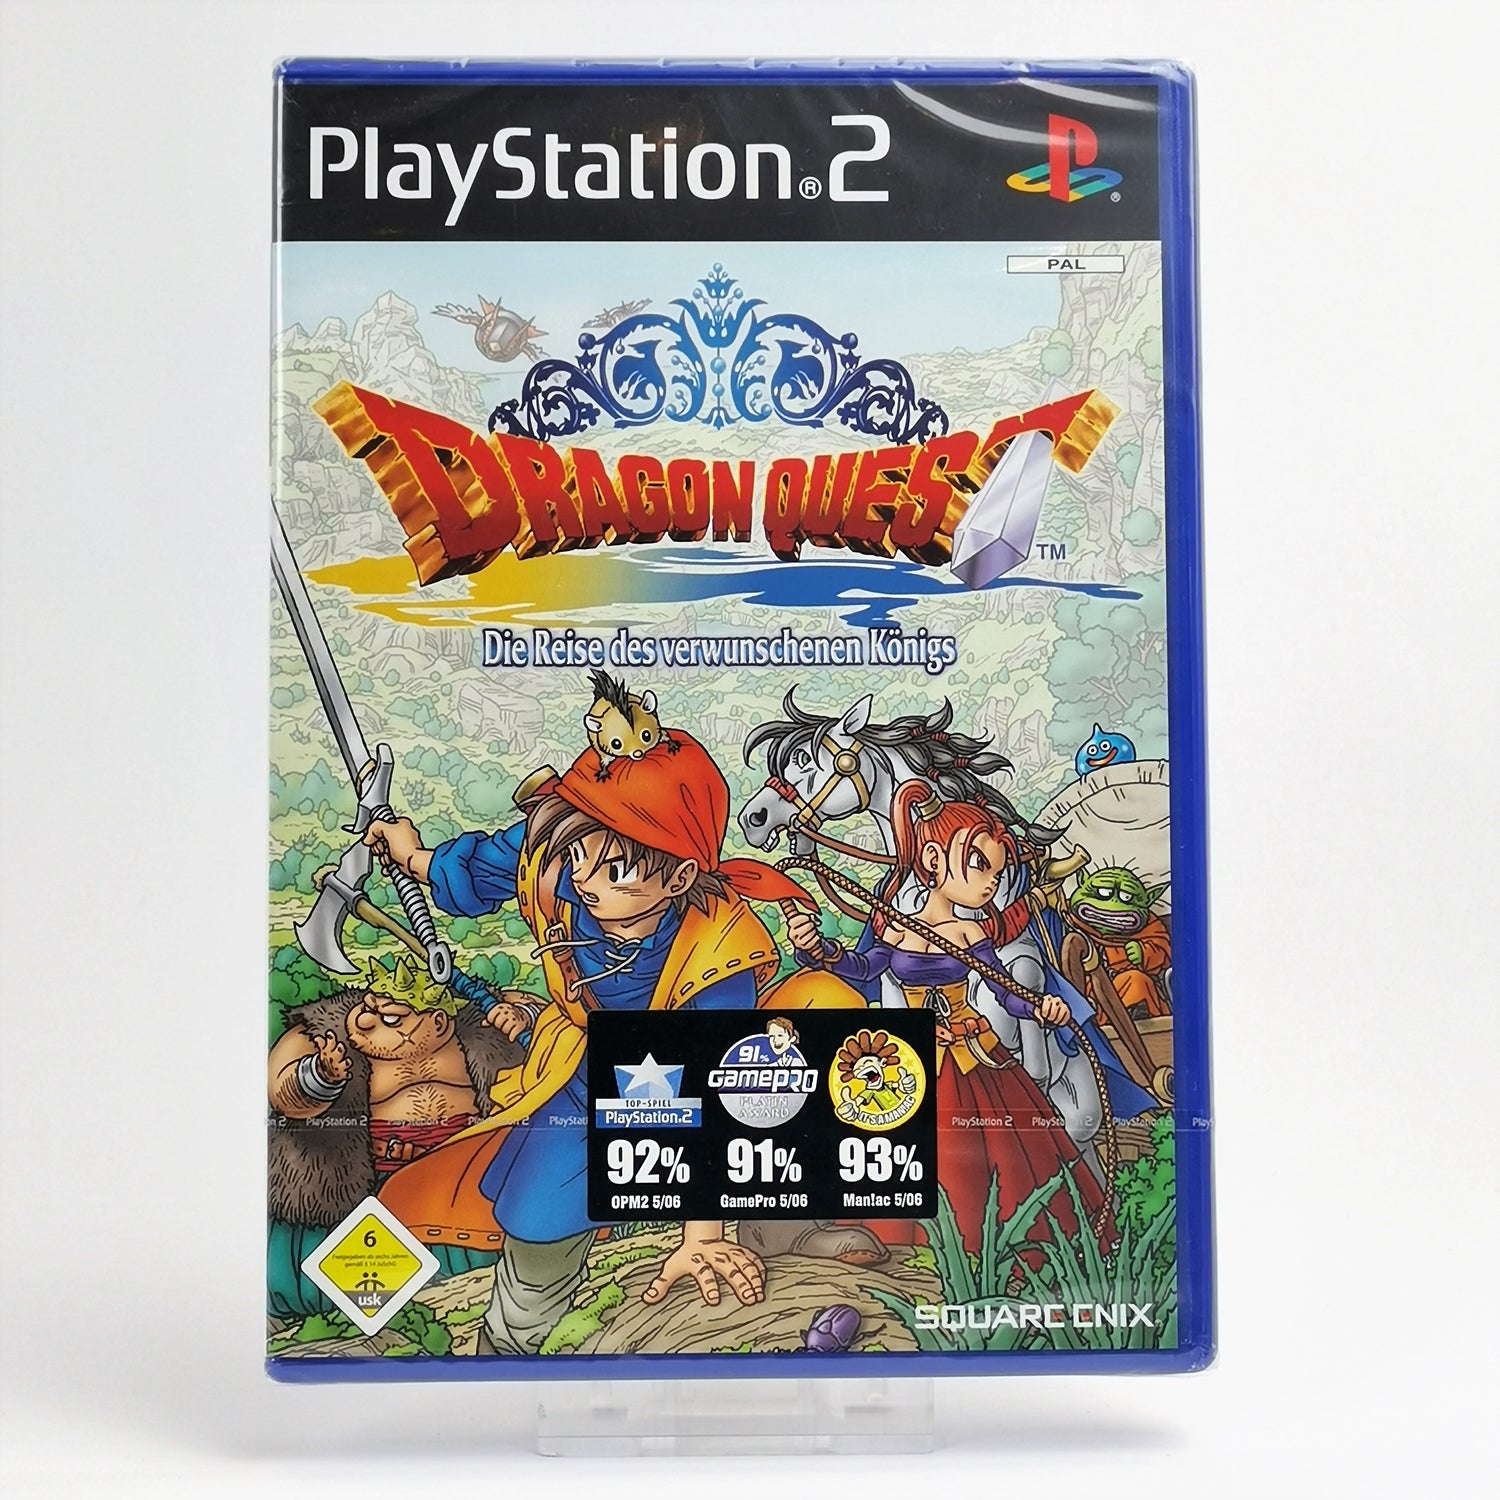 Sony Playstation 2 Game: Dragon Quest The Journey of the Cursed King - NEW